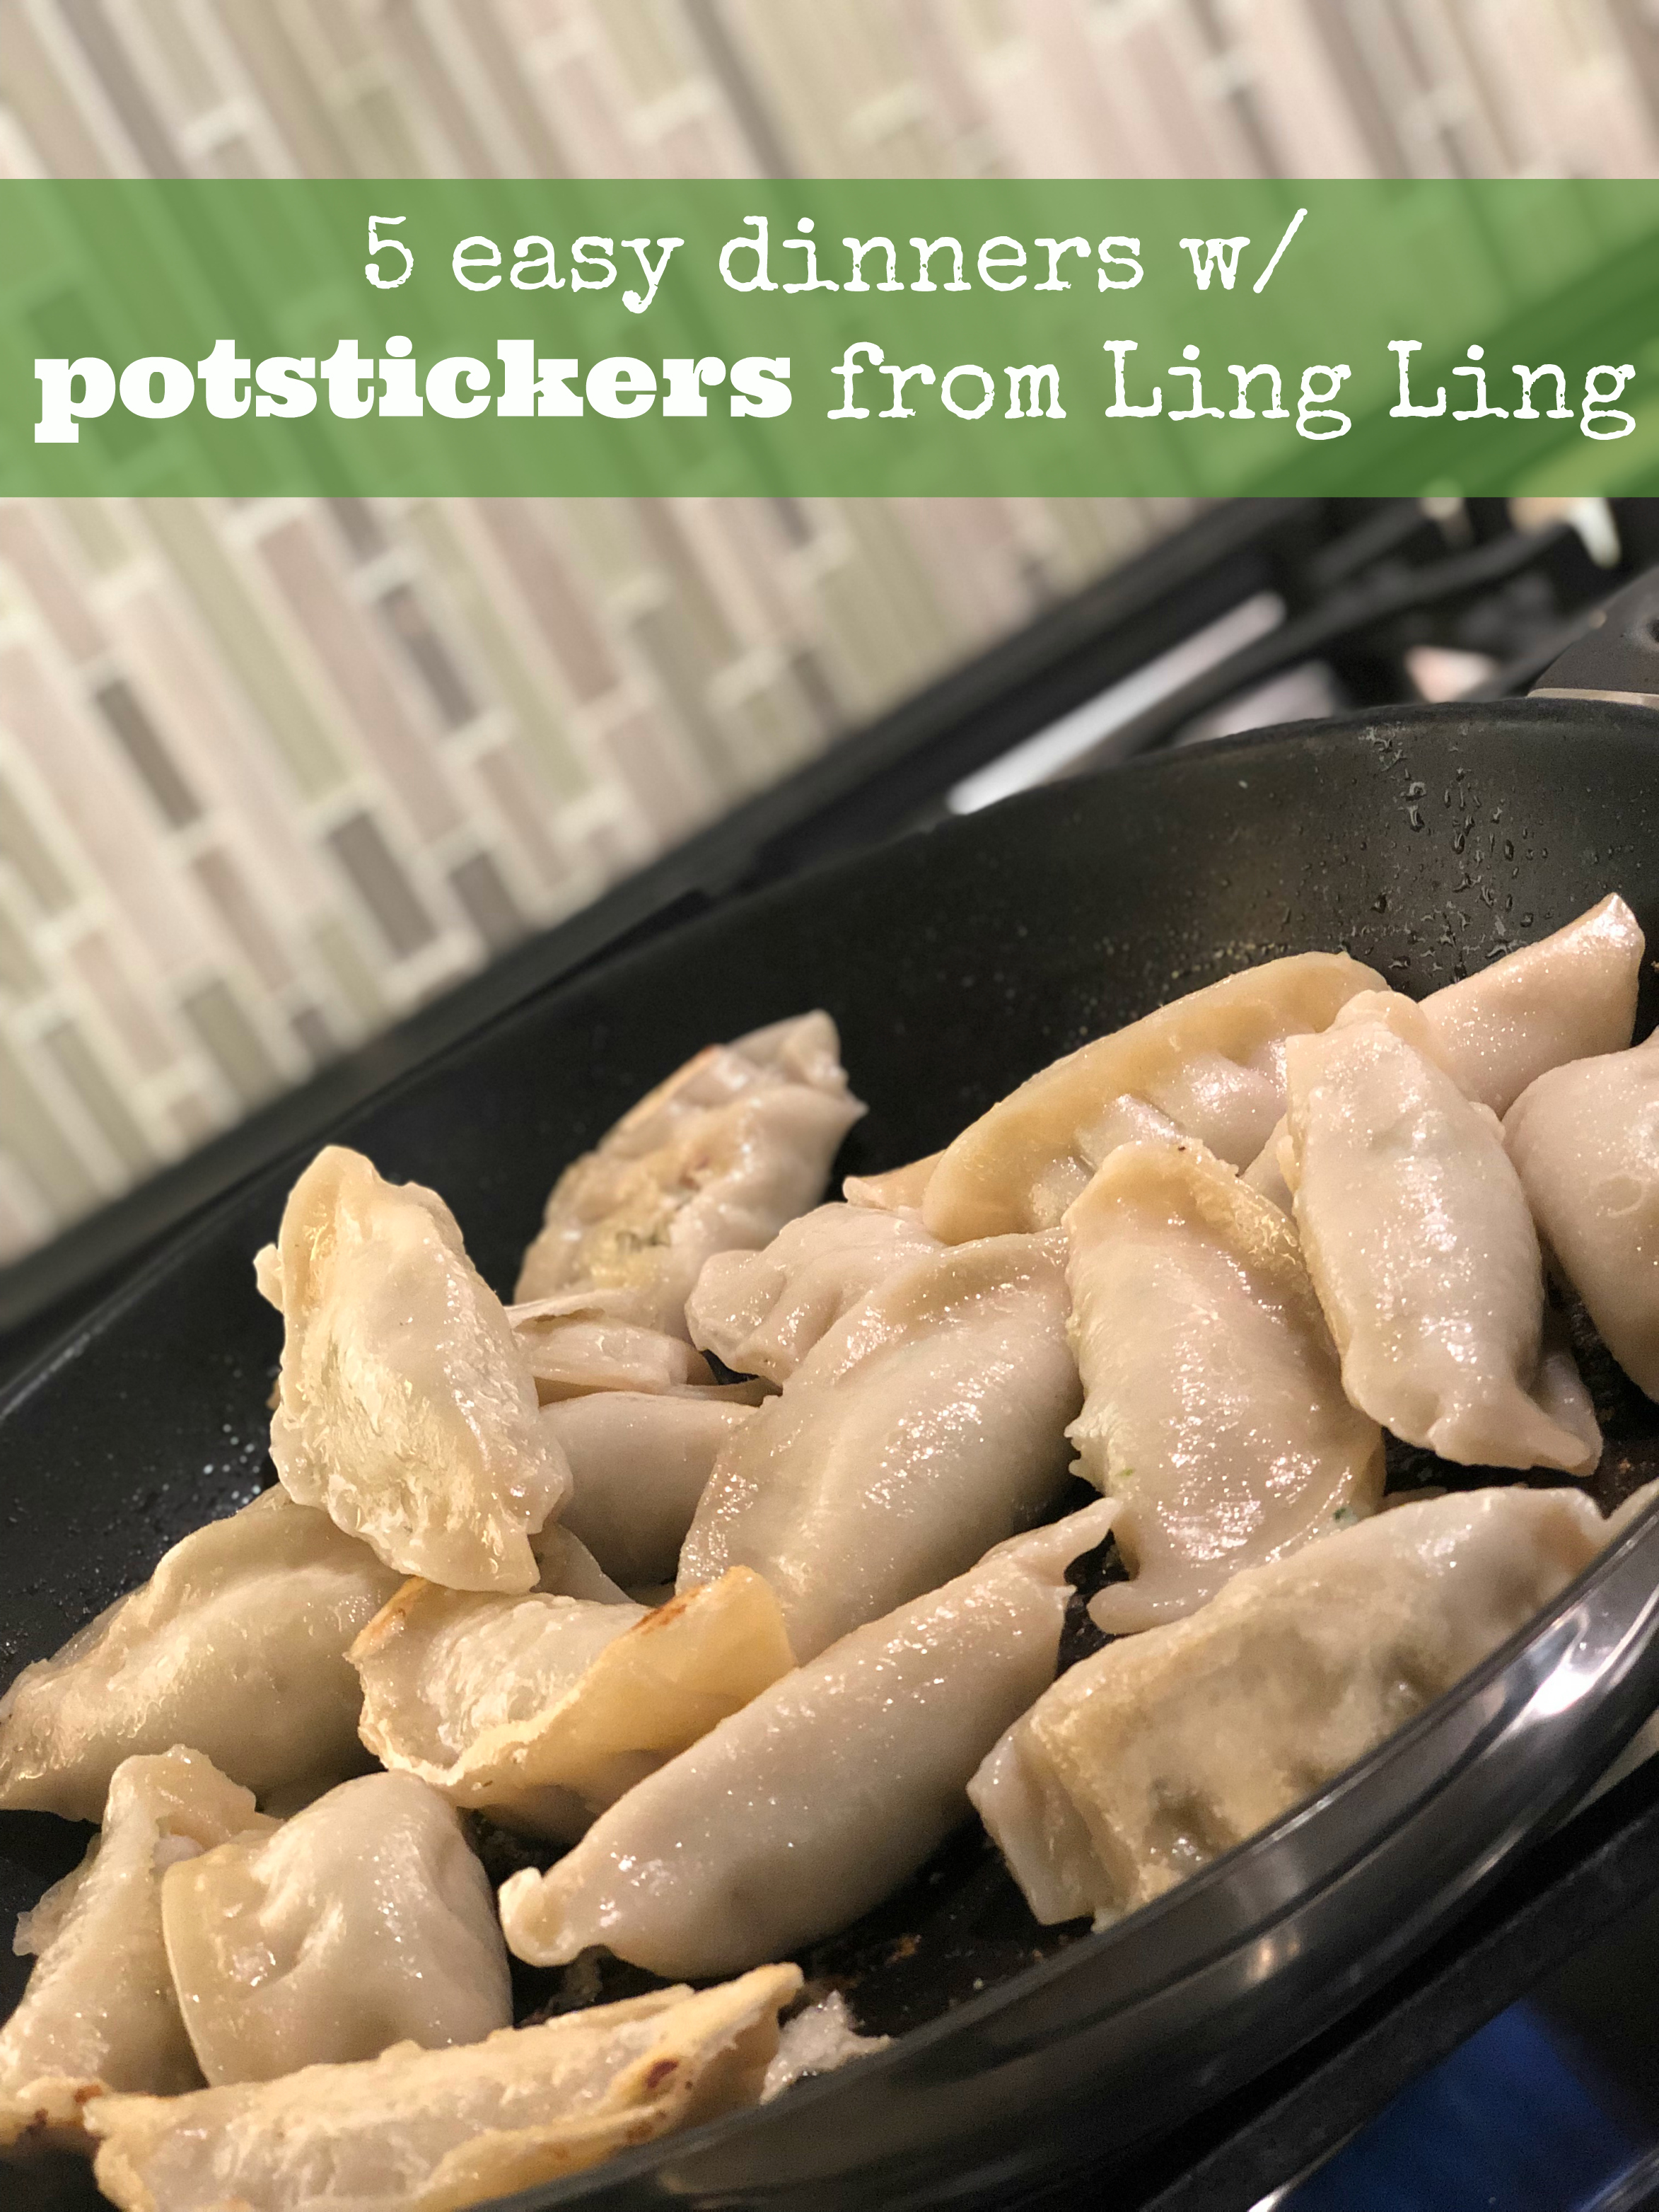 5 easy dinners with potstickers from ling ling